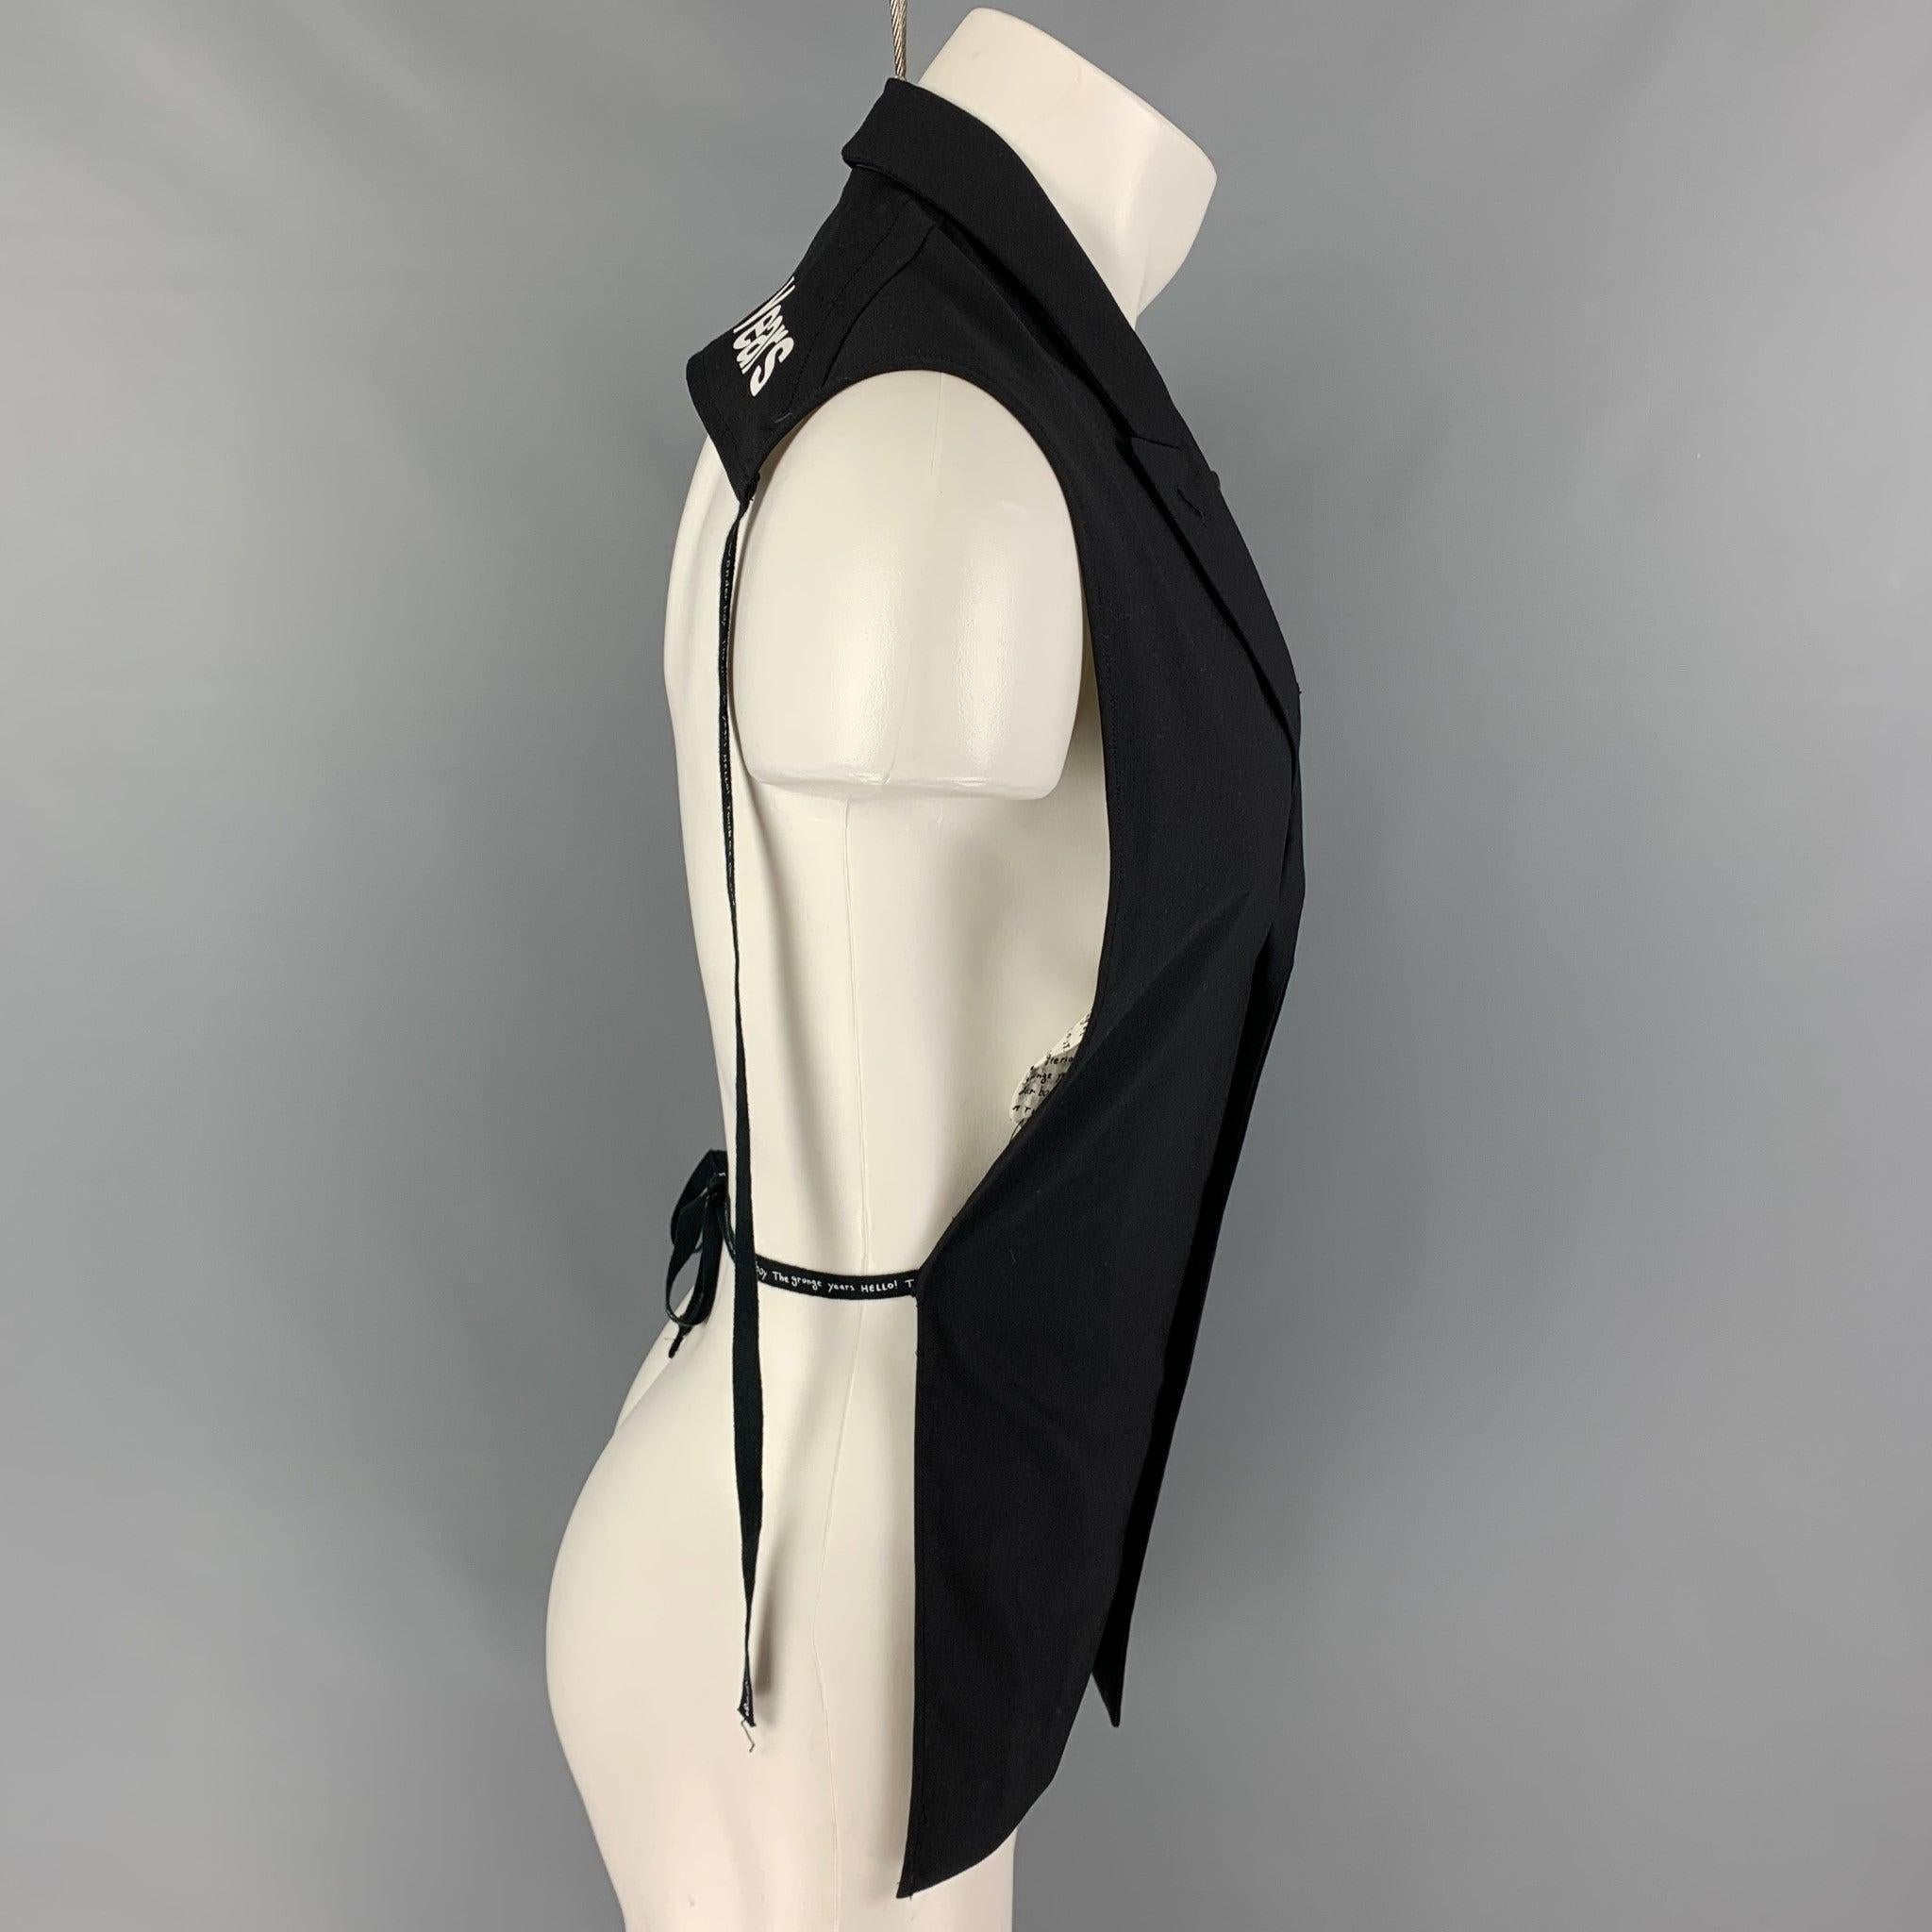 TAKAHIROMOIYASHITA vest comes in a black cotton featuring a open back, peak lapel, back self-tie straps, white 